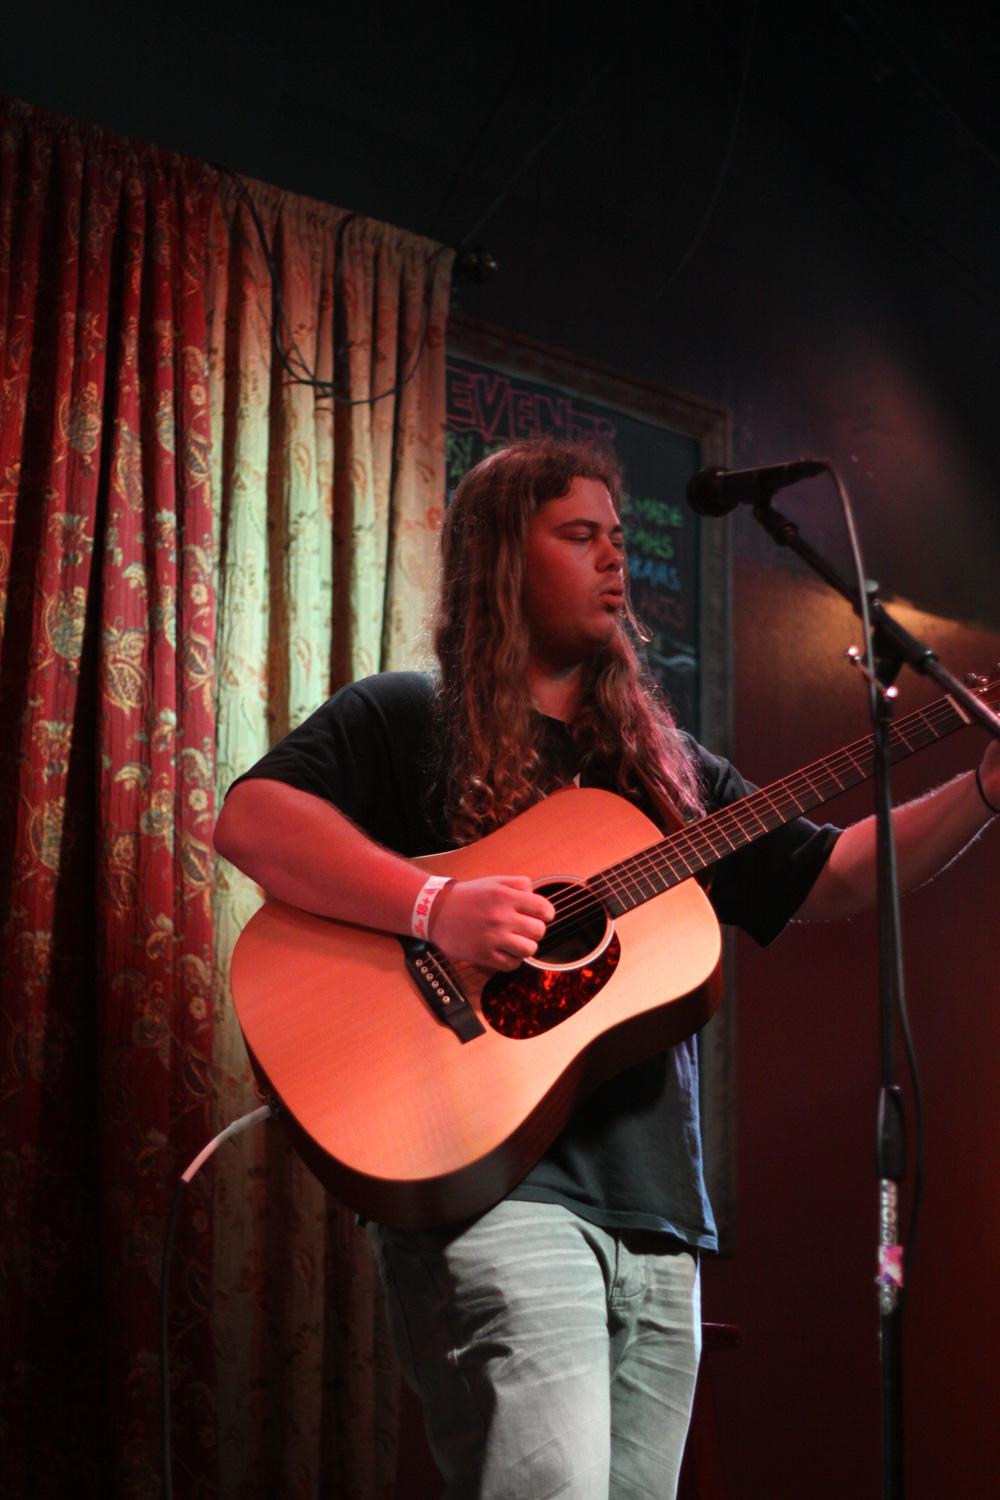 Garrett Kealer, a junior commercial music major, delivering a colorful performance at the Funky Buddha Lounge & Brewery in Boca Raton, Fla. on Feb. 6. Josh Talero | Contributing Photographer